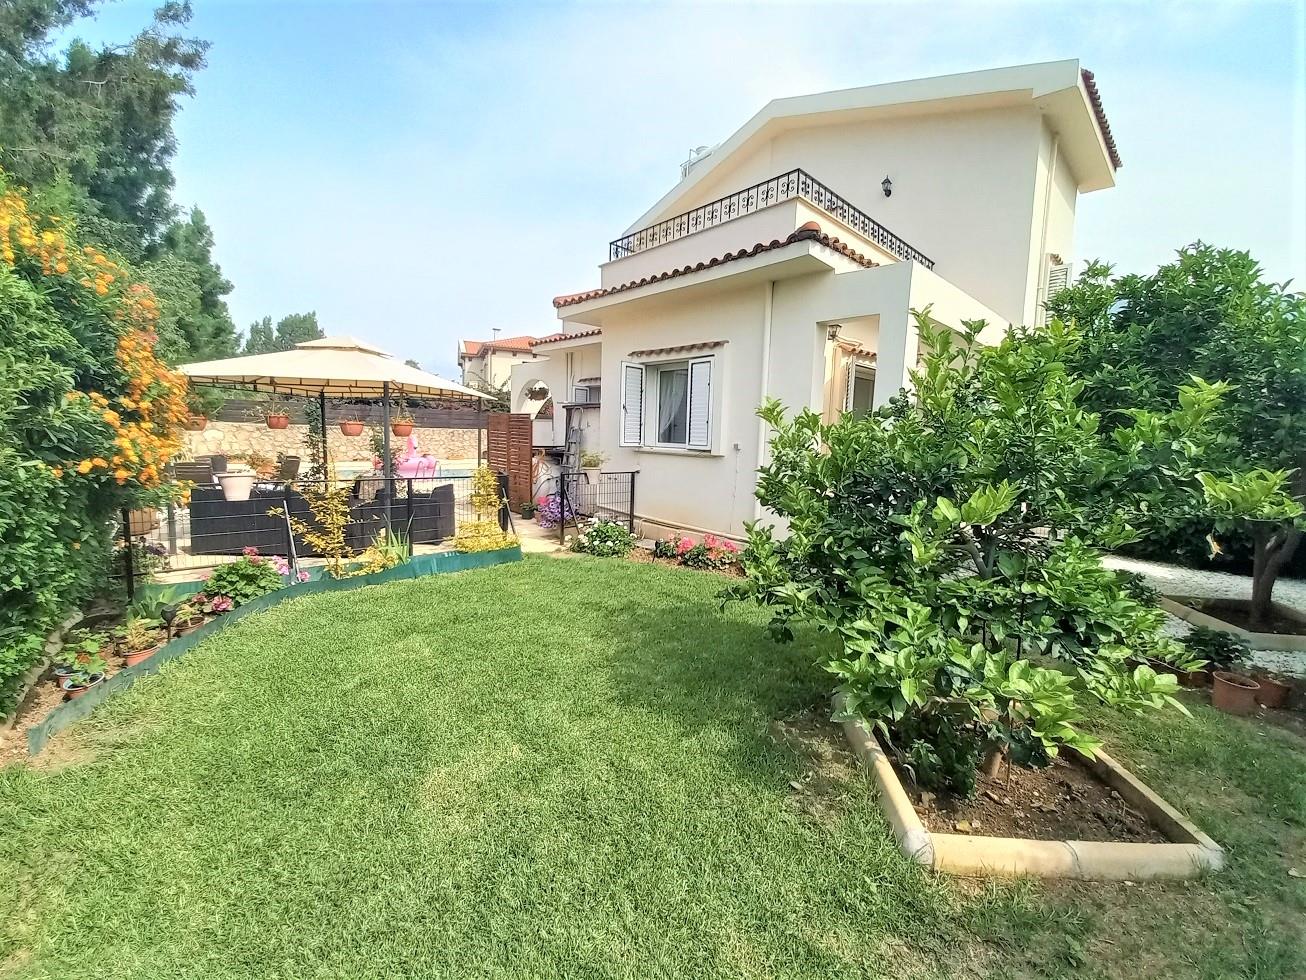 3 bed villa for sale, Dogankoy - Property Image 1